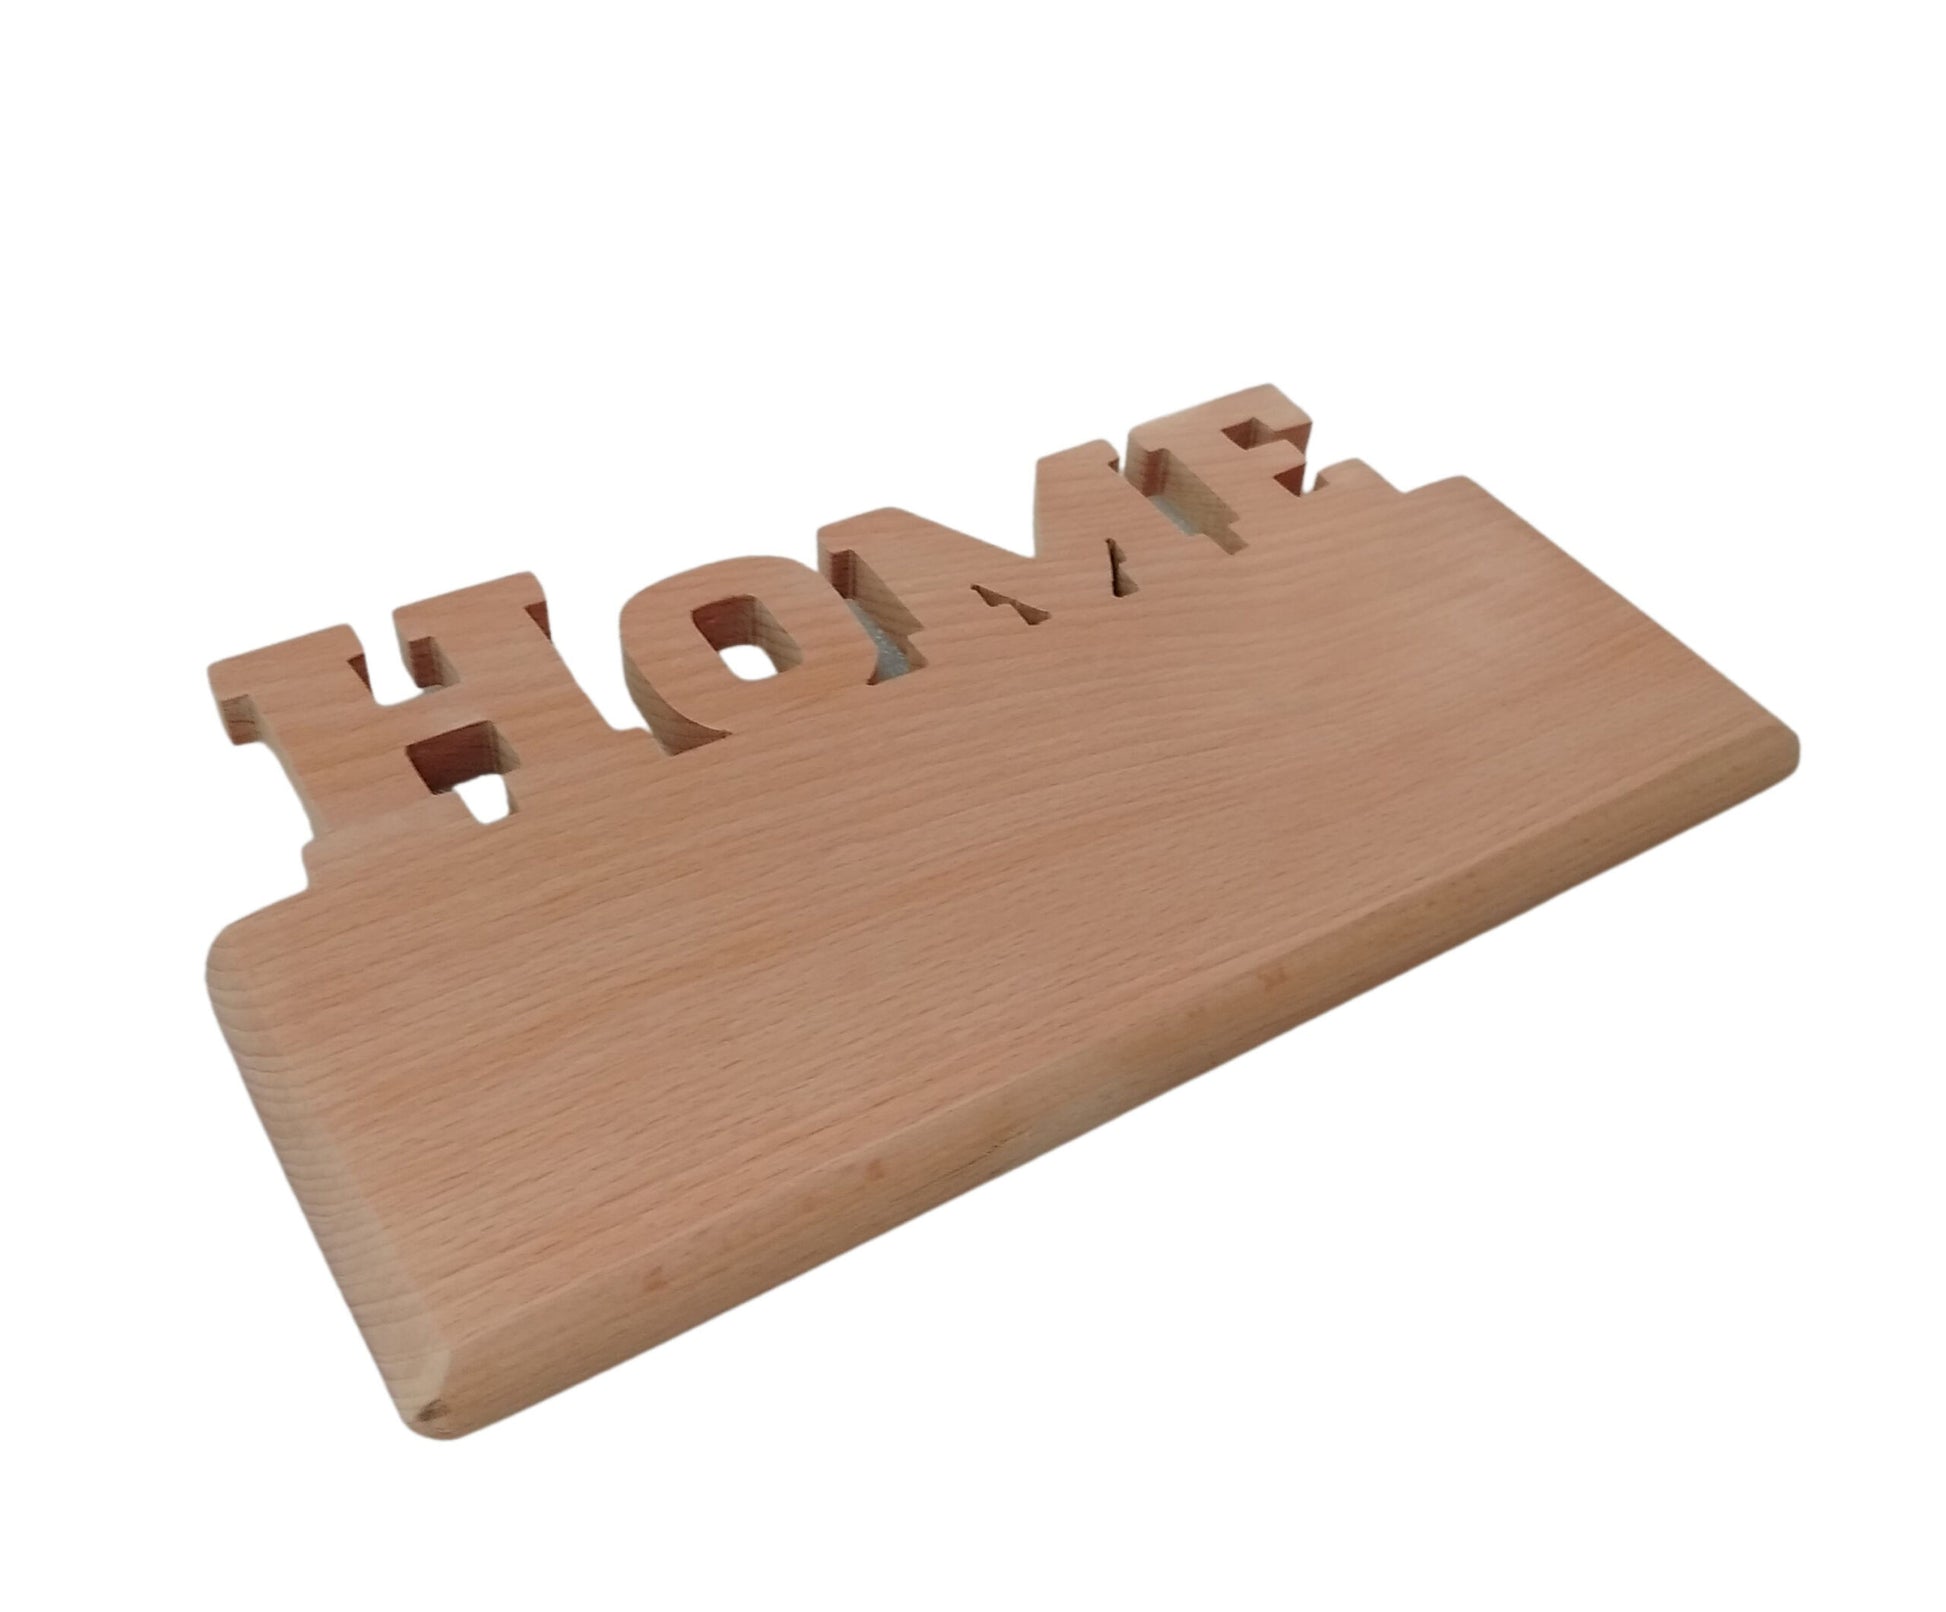 Personalized Engraved Home Shaped Wooden Plaque